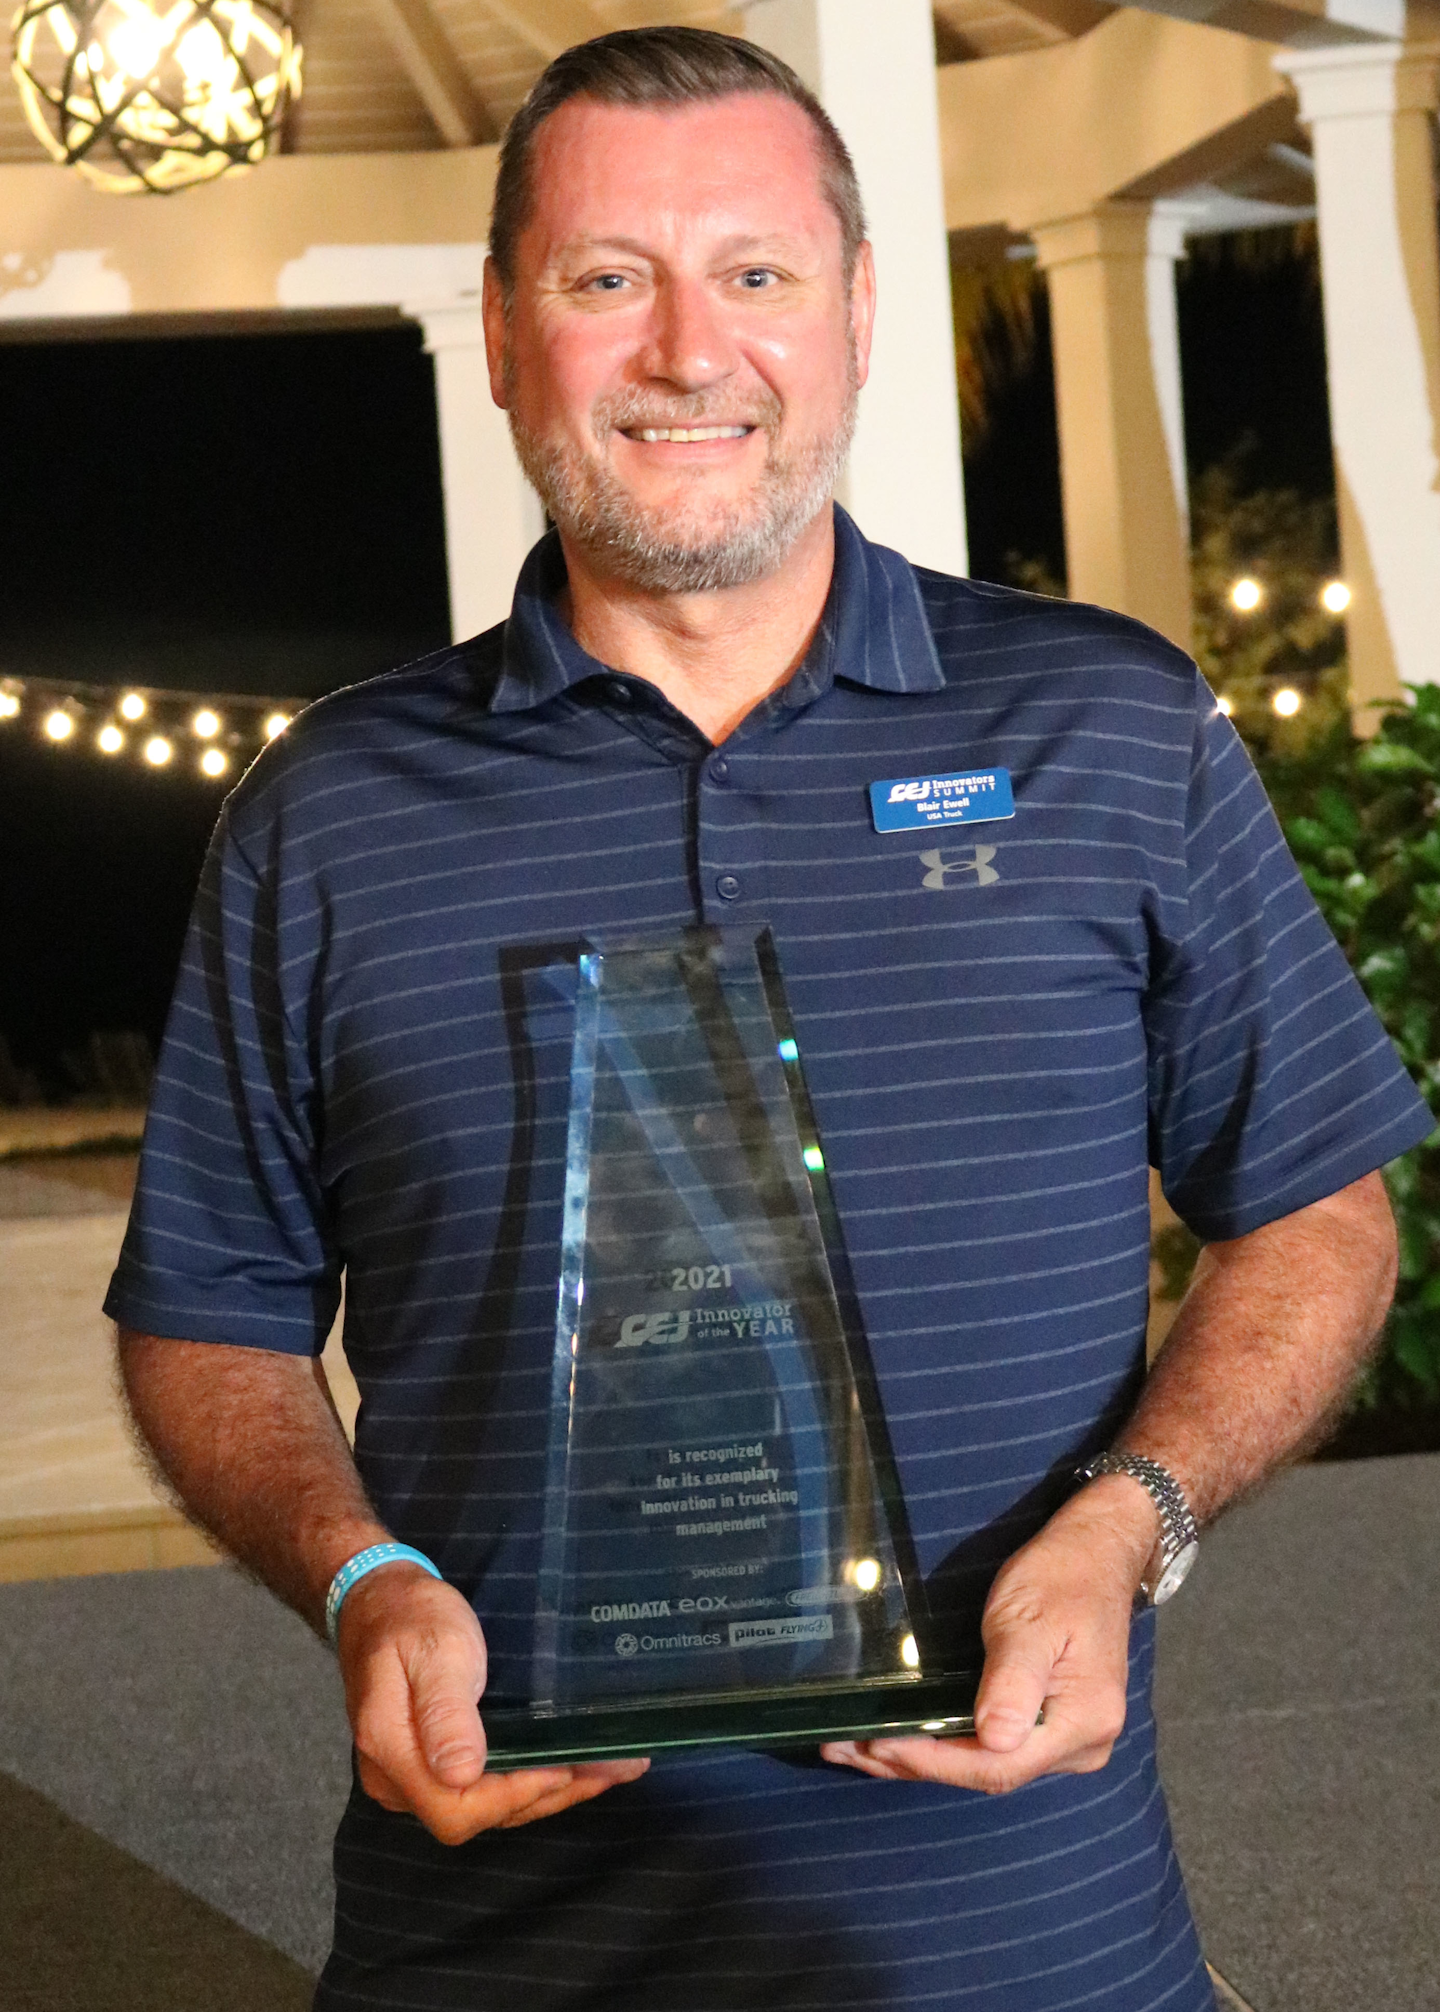 USAT Capacity Solutions was selected by CCJ editors as the 2021 CCJ Innovator of the Year at the 17th annual CCJ Innovators Summit in Key Largo, Florida. Accepting the award on the company's behalf was Blair Ewell.